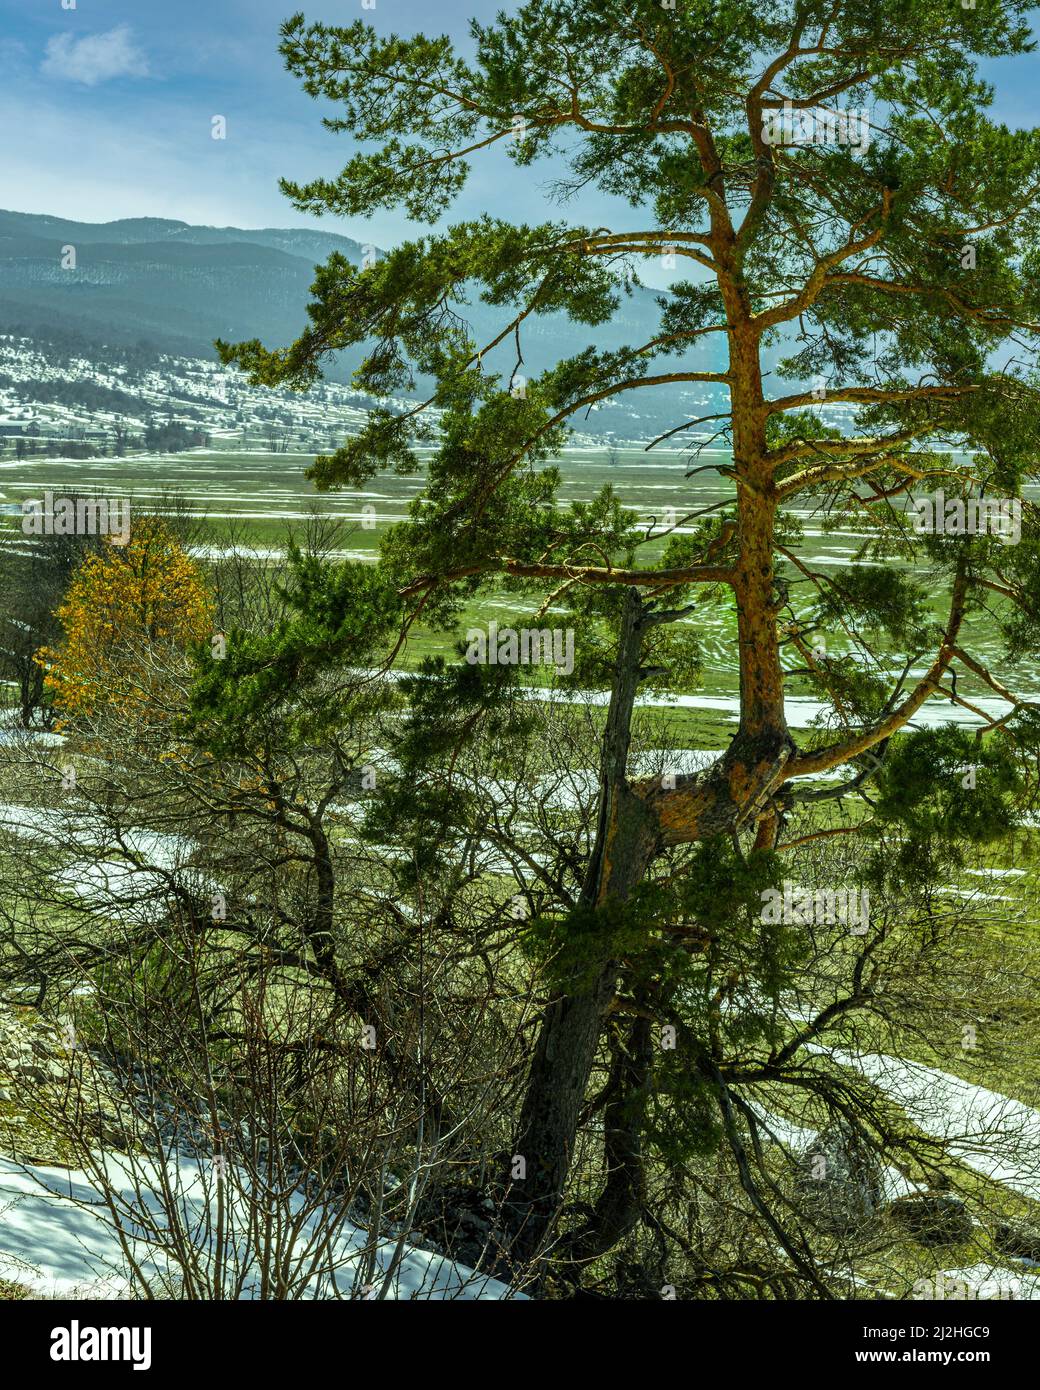 Mountain landscape of a sunny day with a twisted pine tree on a hillside with still snow on the ground. Maiella National Park, Abruzzo, Italy, Europe Stock Photo